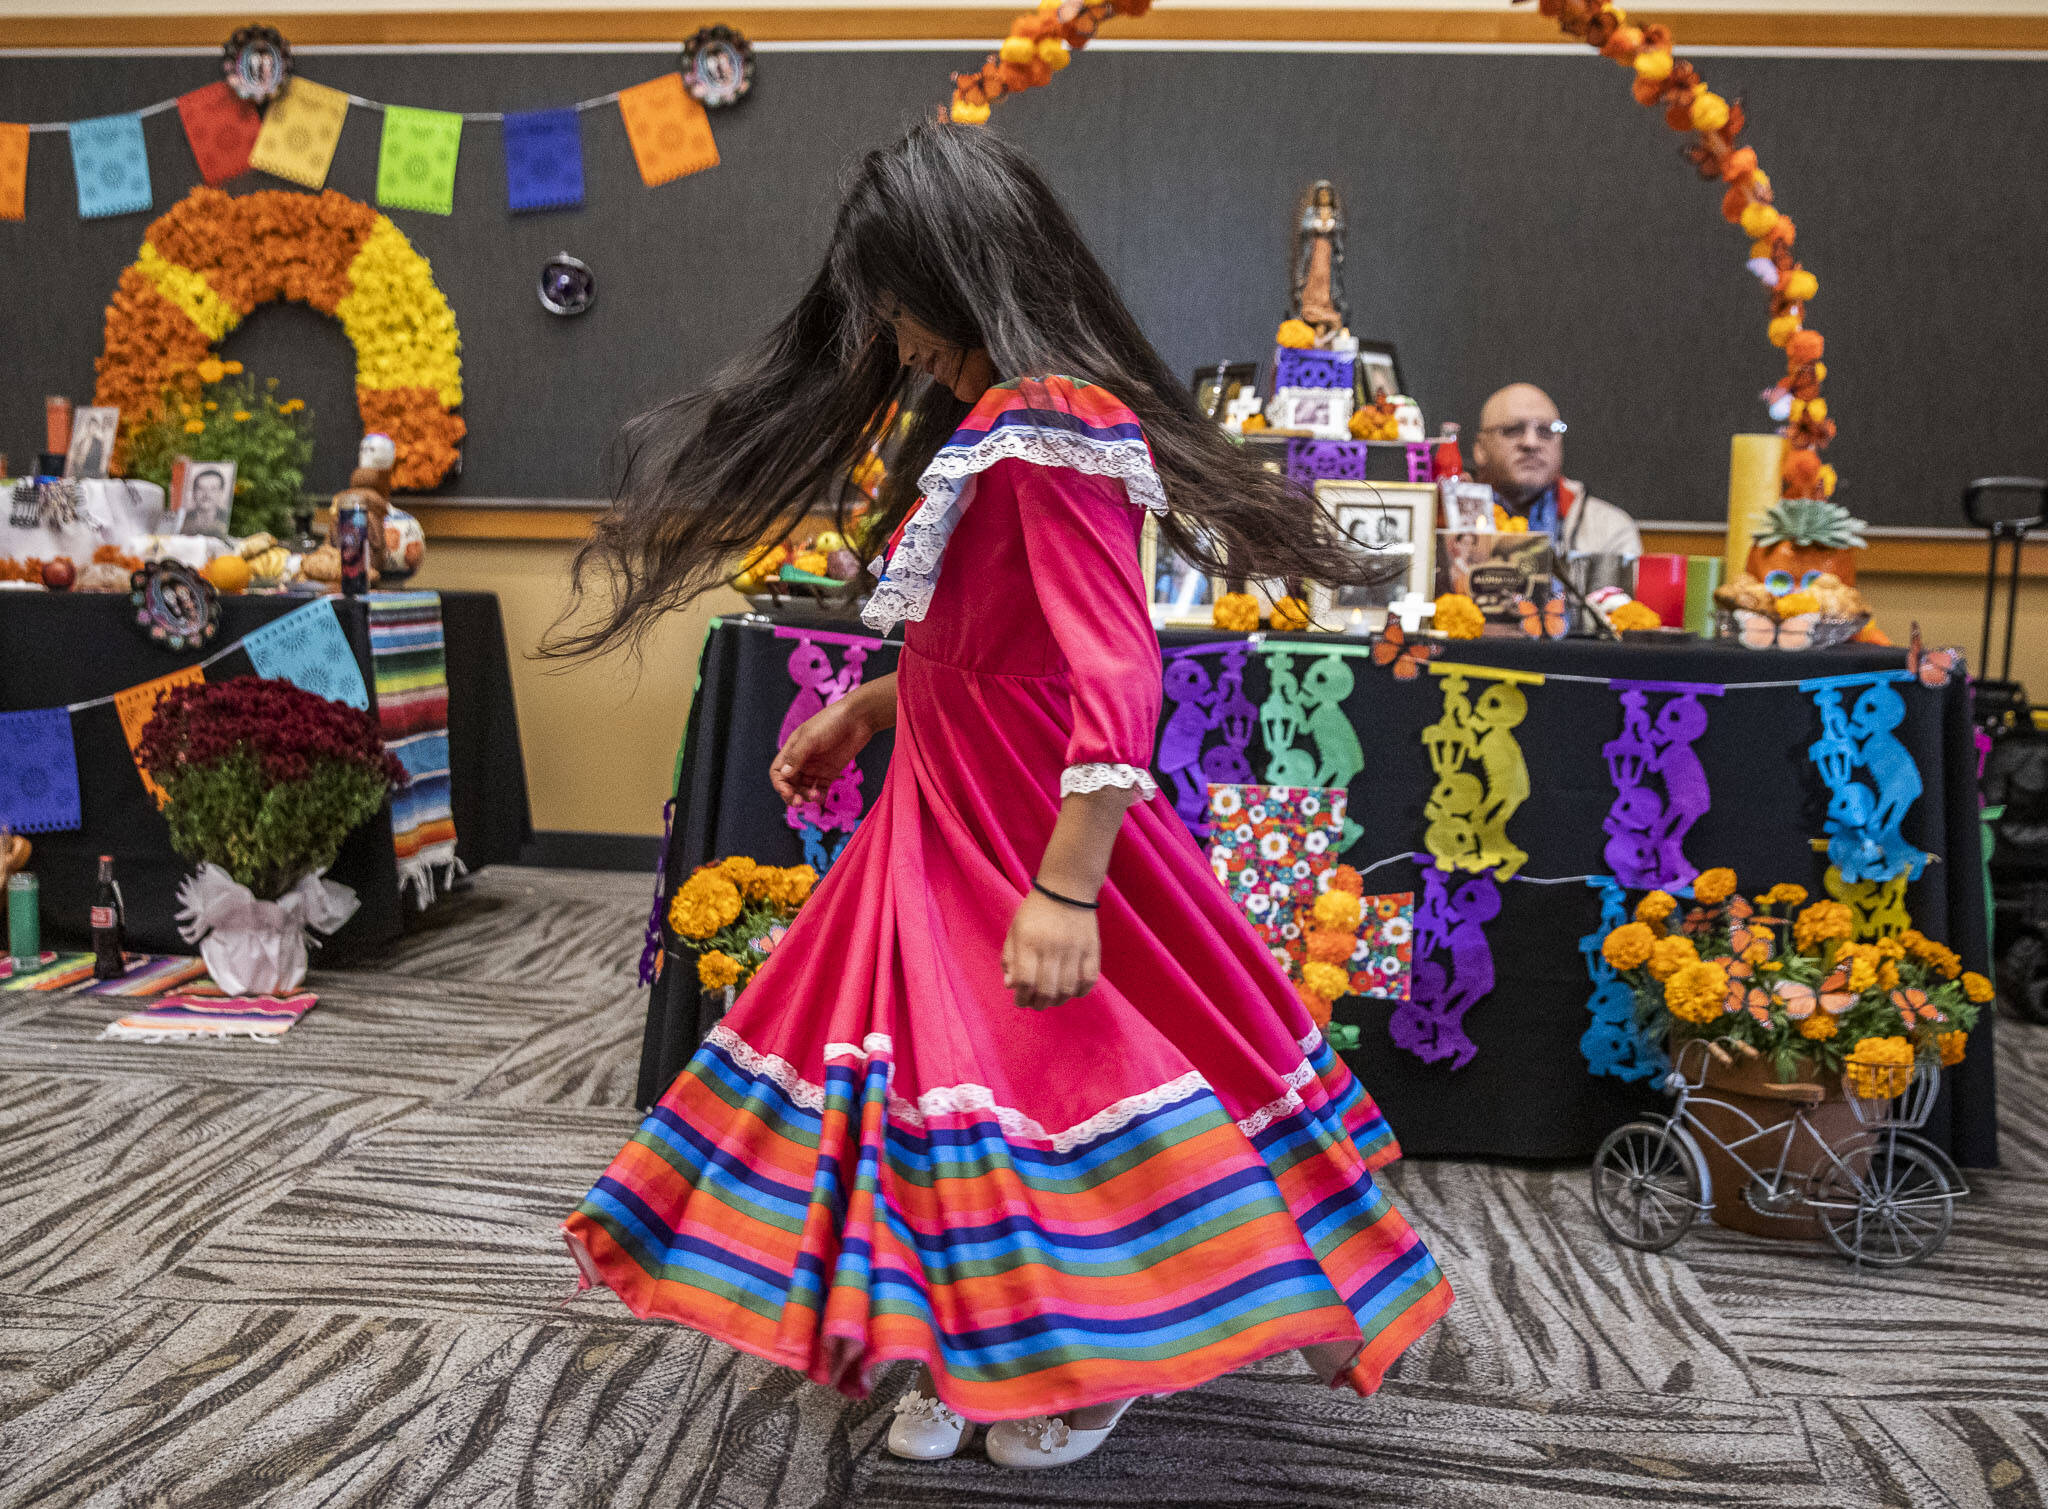 Belinda Reyes-Ordoñez, 7, spins in her dress while looking at the different ofrendas at the Washington-Guerrero Foundation’s Día de los Muertos event at the Lynnwood Convention Center on Saturday, in Lynnwood. (Olivia Vanni / The Herald)